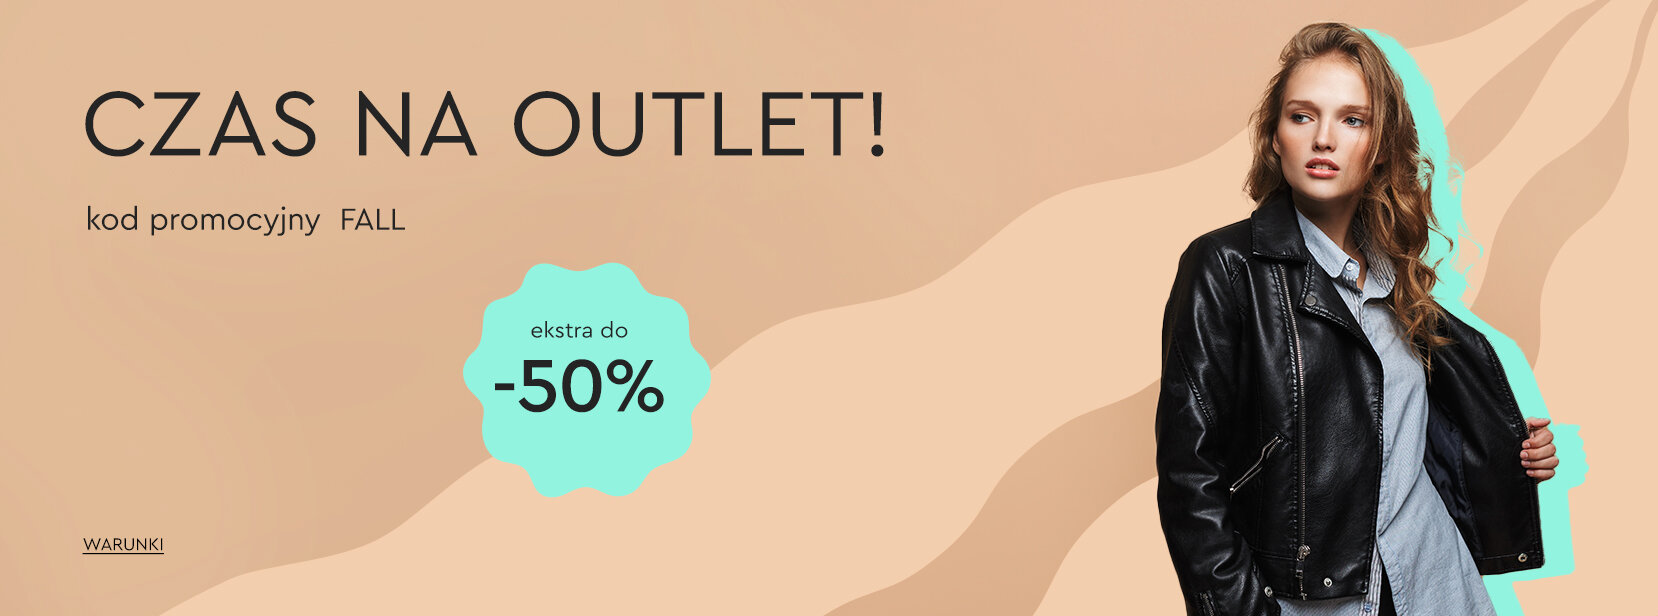 CZAS NA OUTLET!